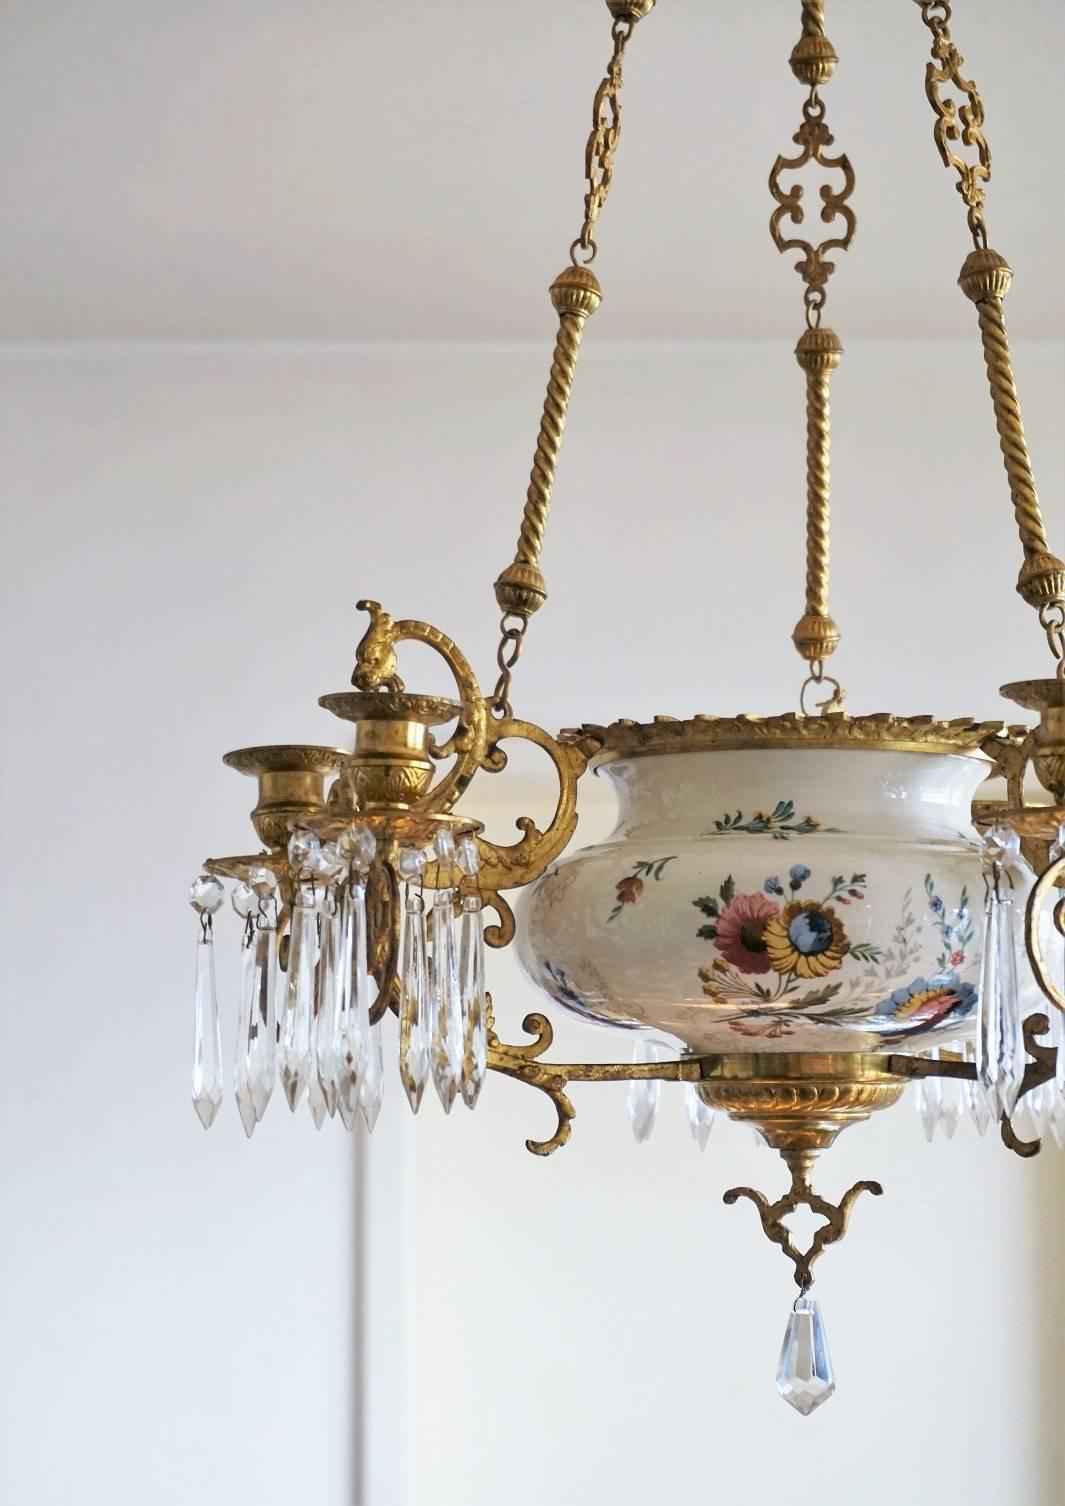 19th Century French Dóre Bronze and Faience Candle Chandelier, Choisy-le-Roy (Vergoldet)